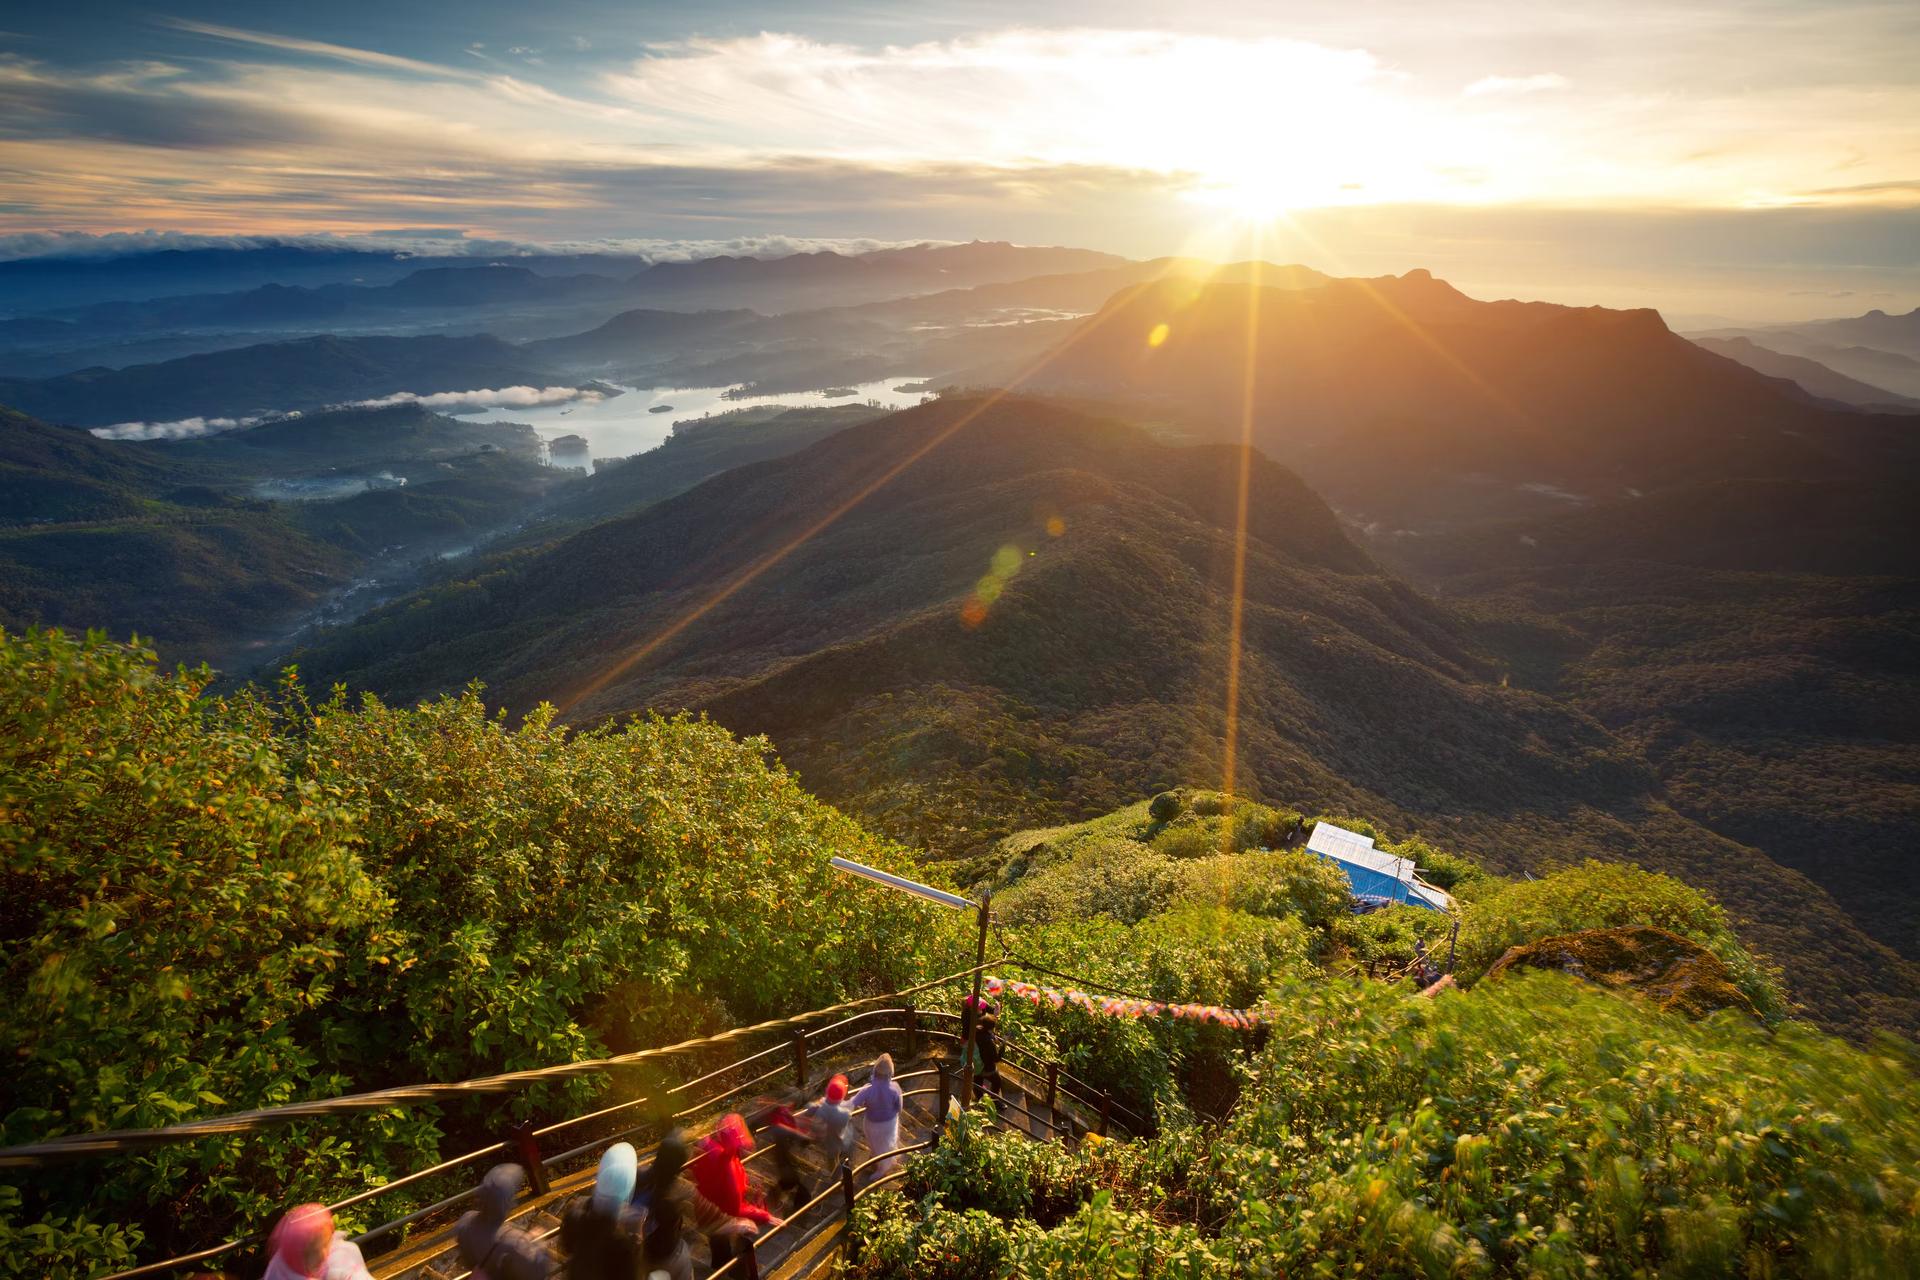 Valley view with villages and mountains at sunrise. View from Adam's peak.